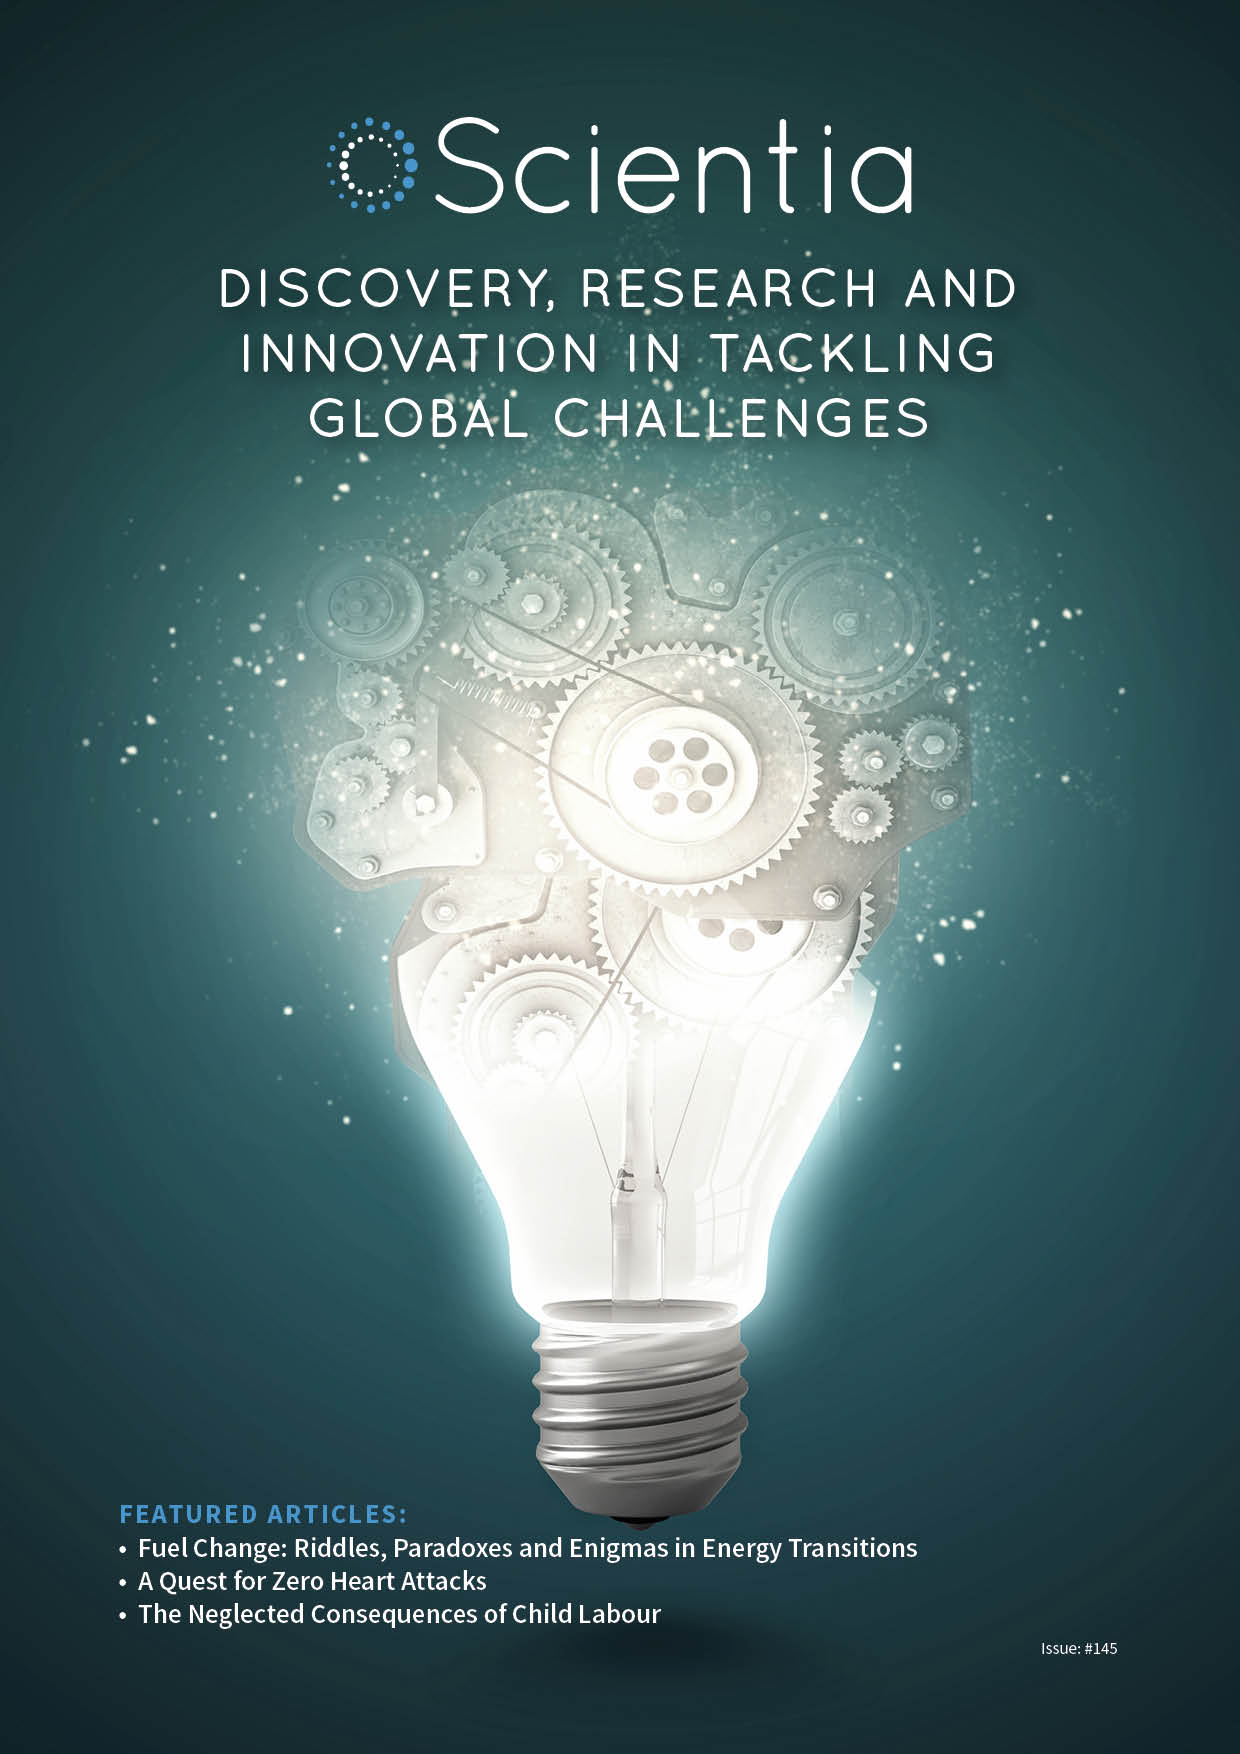 Scientia Issue #145 | Discovery, Research and Innovation in Tackling Global Challenges